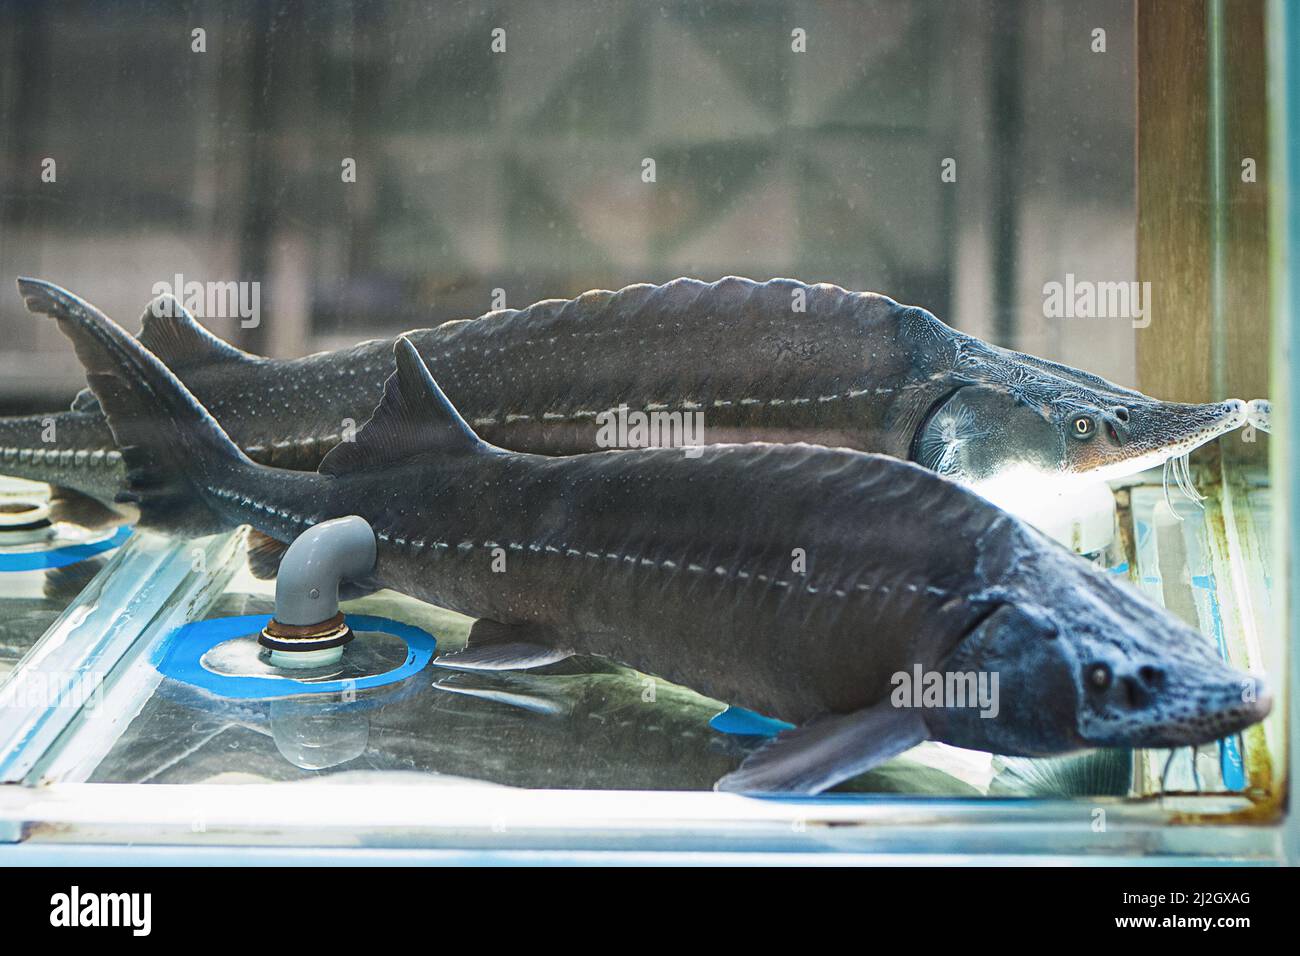 Siberian sturgeons for sale in fish store, live fish in supermarket Stock Photo